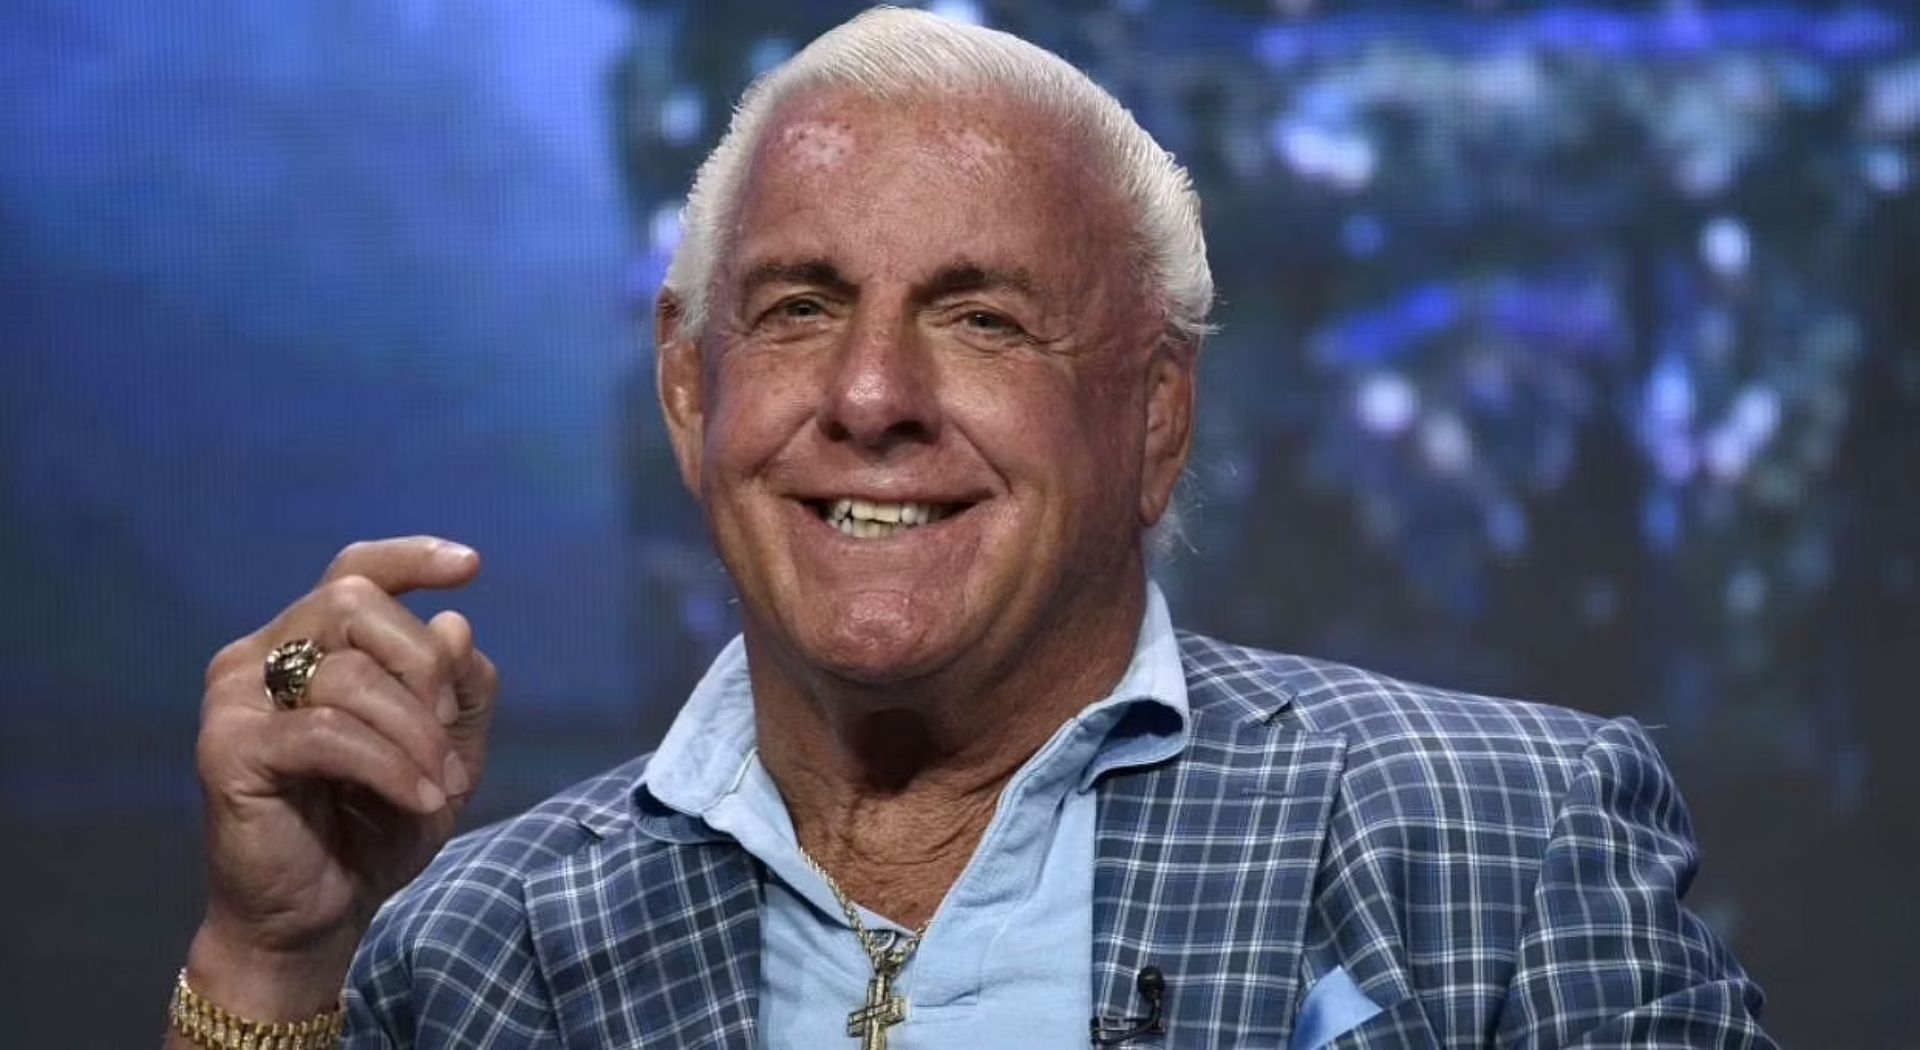 The Nature Boy is scheduled to wrestle his first match in over ten years!